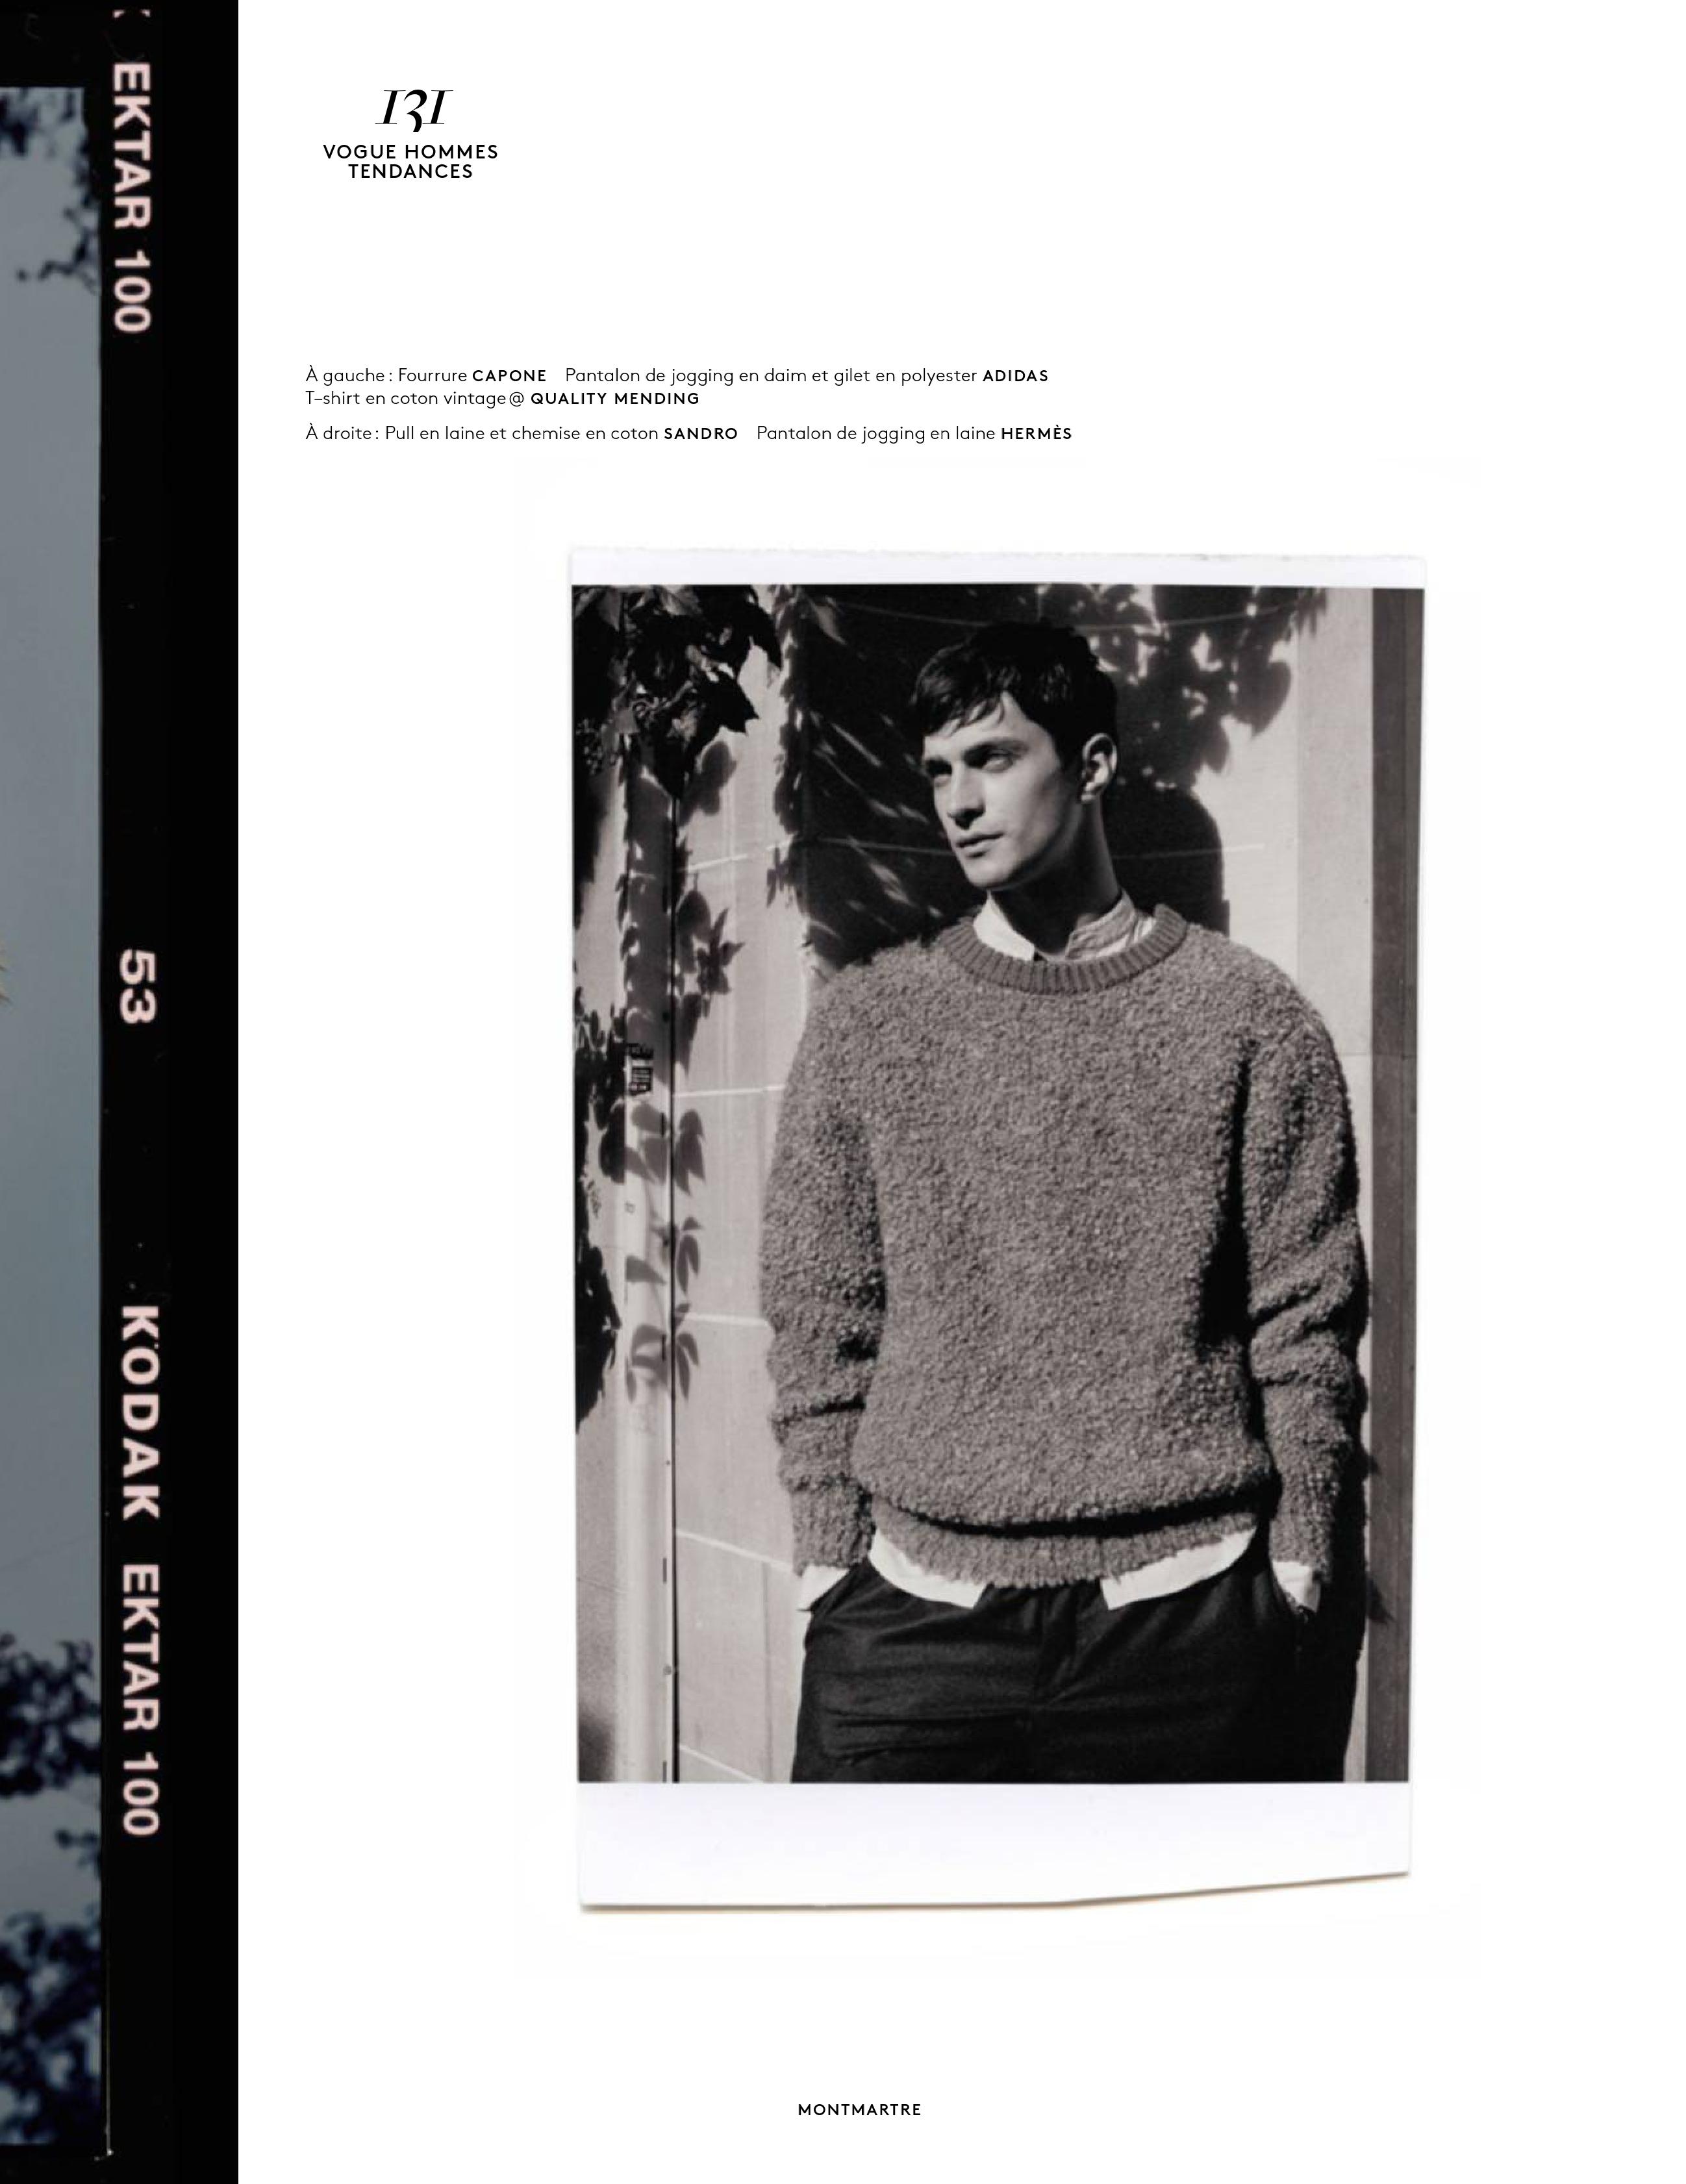 Vogue Hommes Fall Winter 2015 Fashion Editorial 010